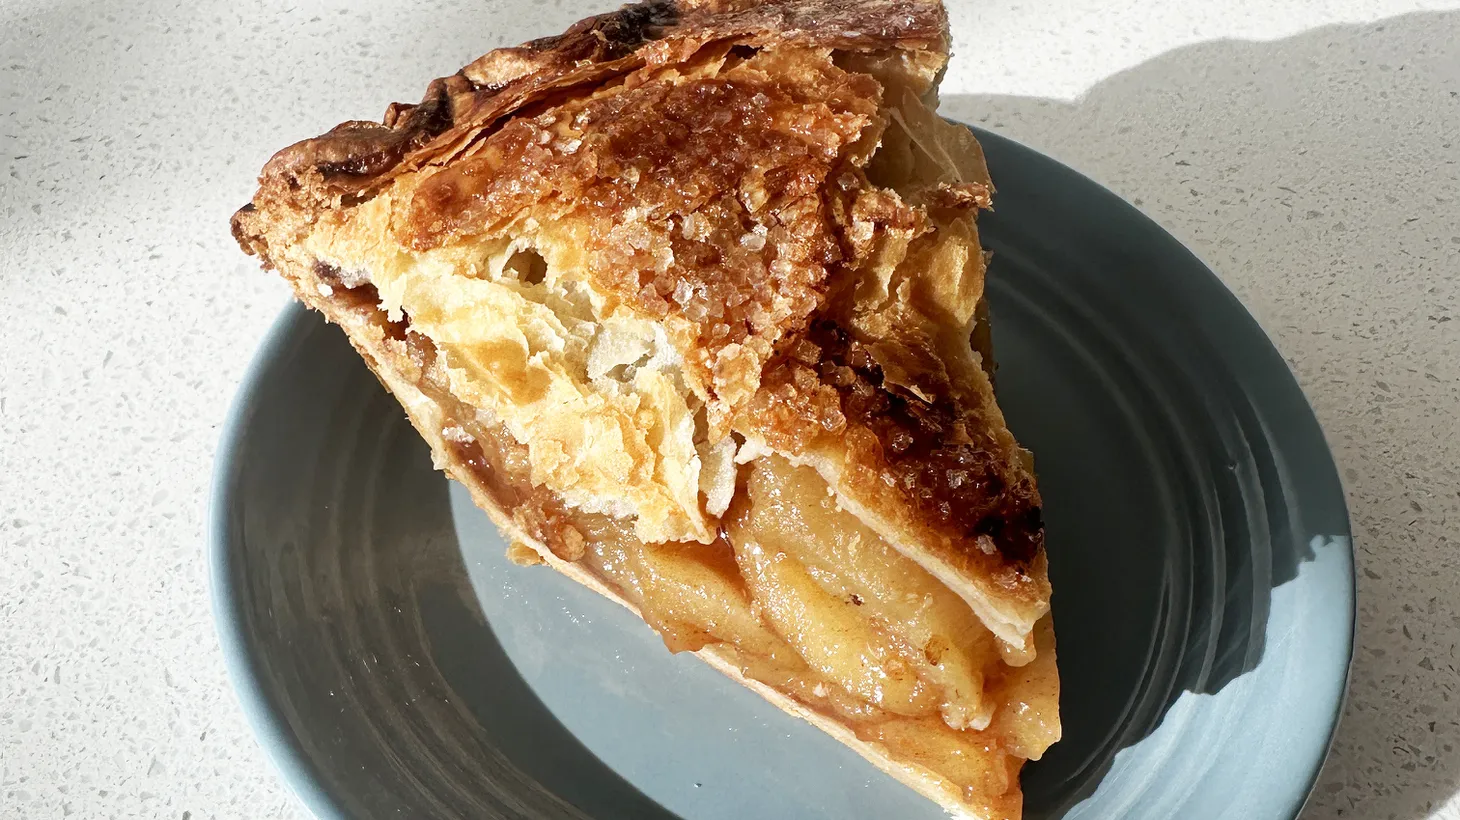 The apple pie at Fat & Flour is a work of art in edible form.